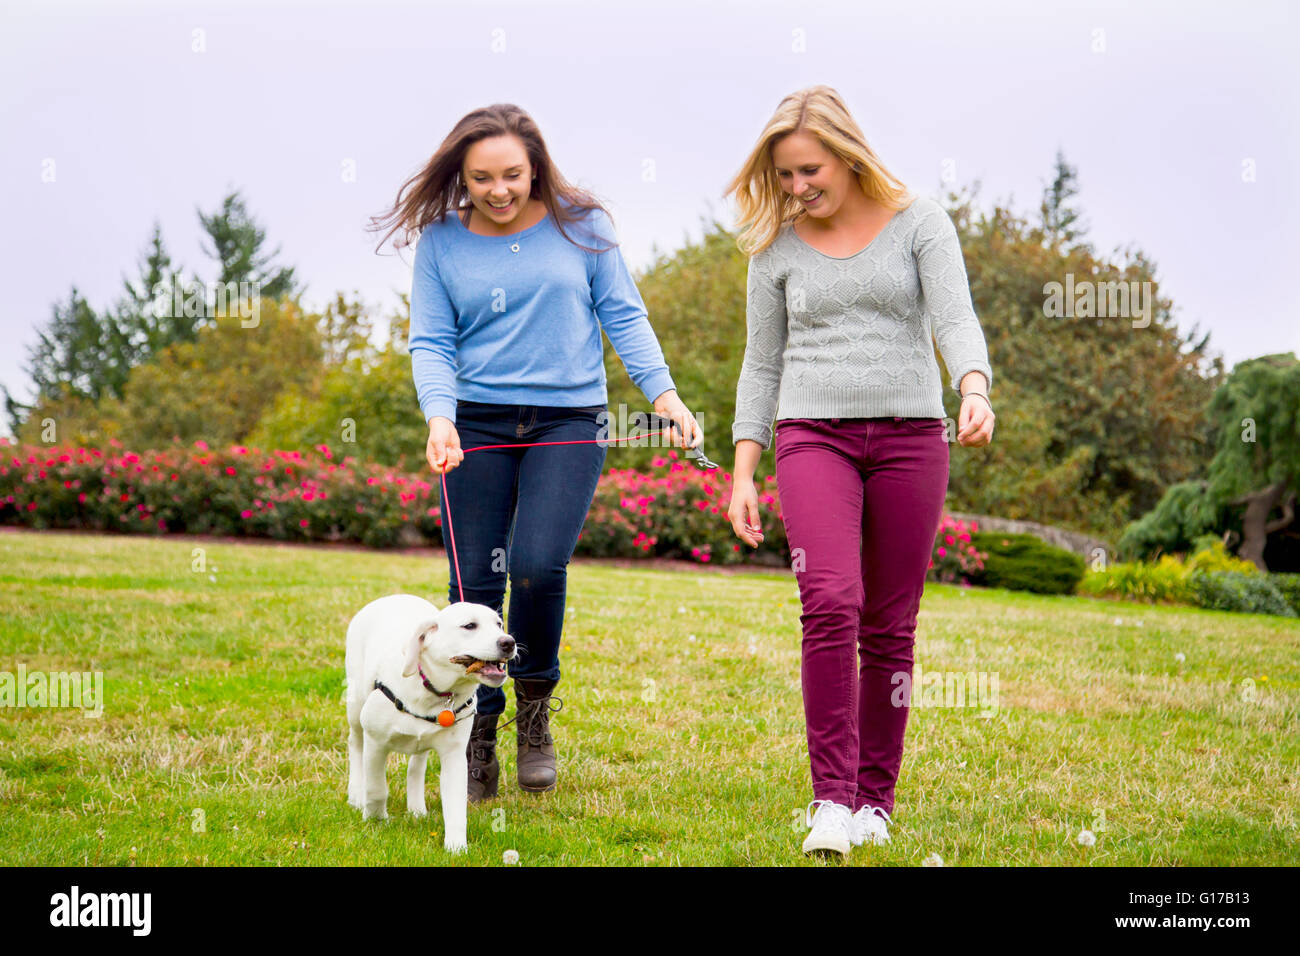 Two young women walking dog in park Stock Photo